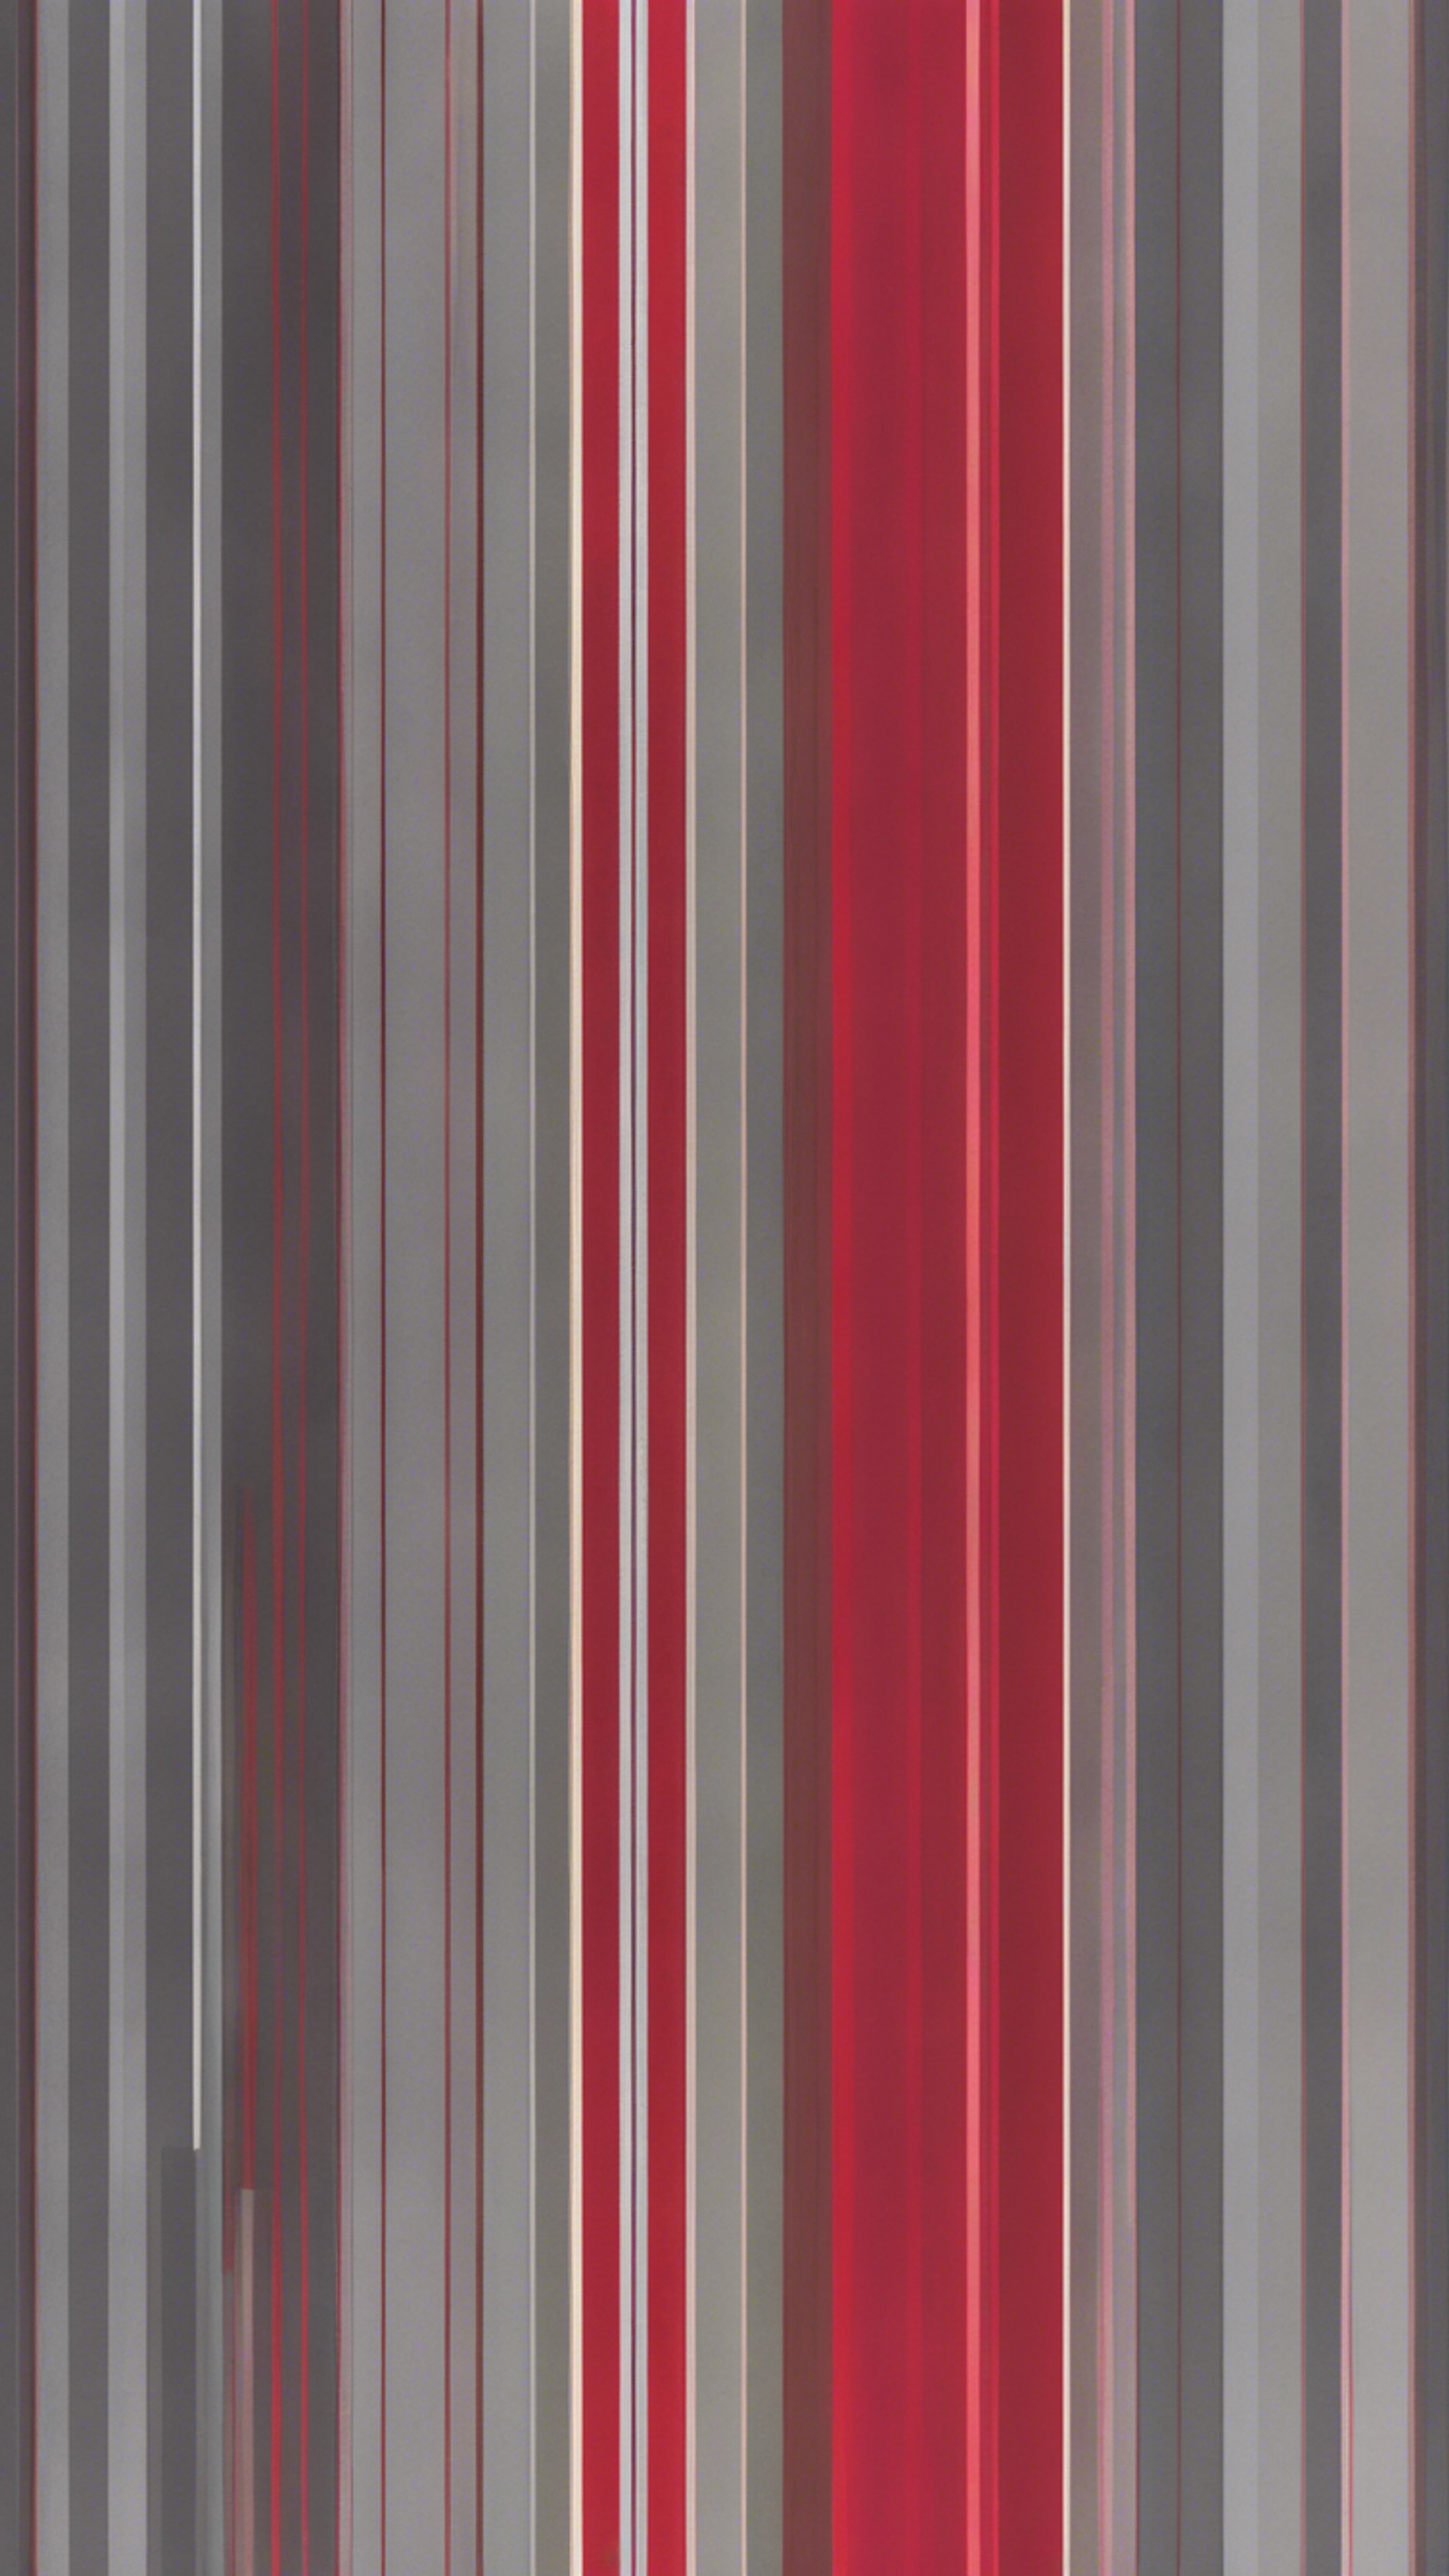 Pattern inspired by modern art, showcasing alternating bands of red and grey in a gradient arrangement. Tapeta[fecd92d91f0c4817b510]